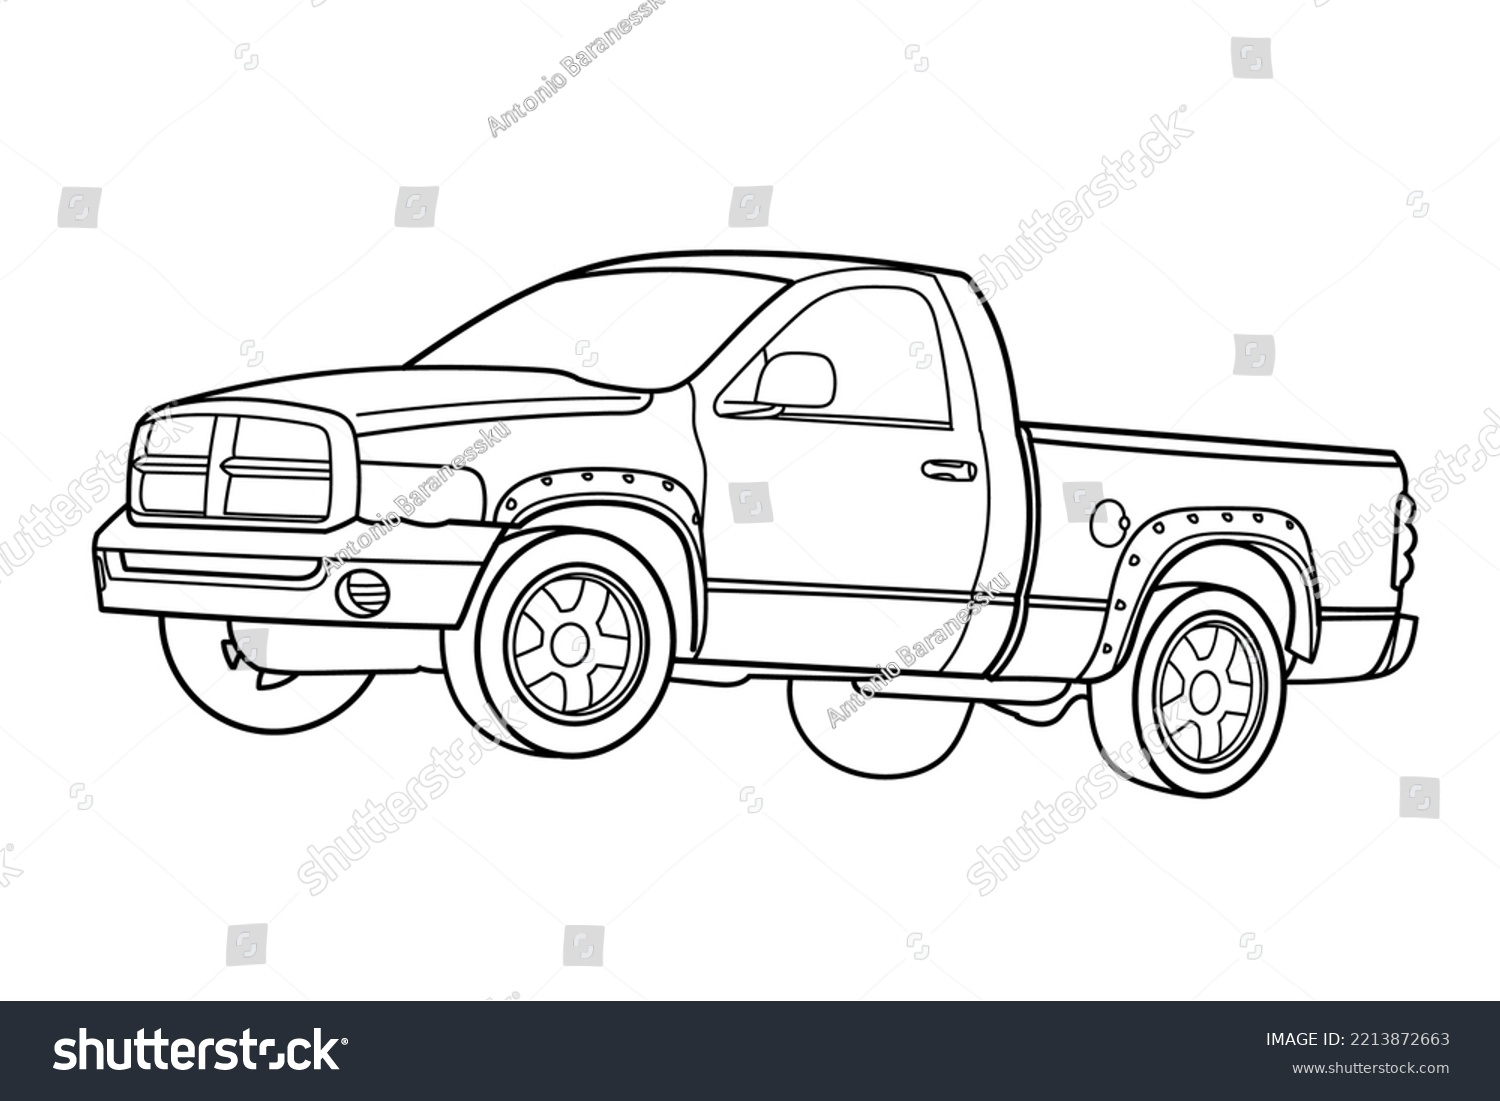 Pickup truck line drawing images stock photos d objects vectors